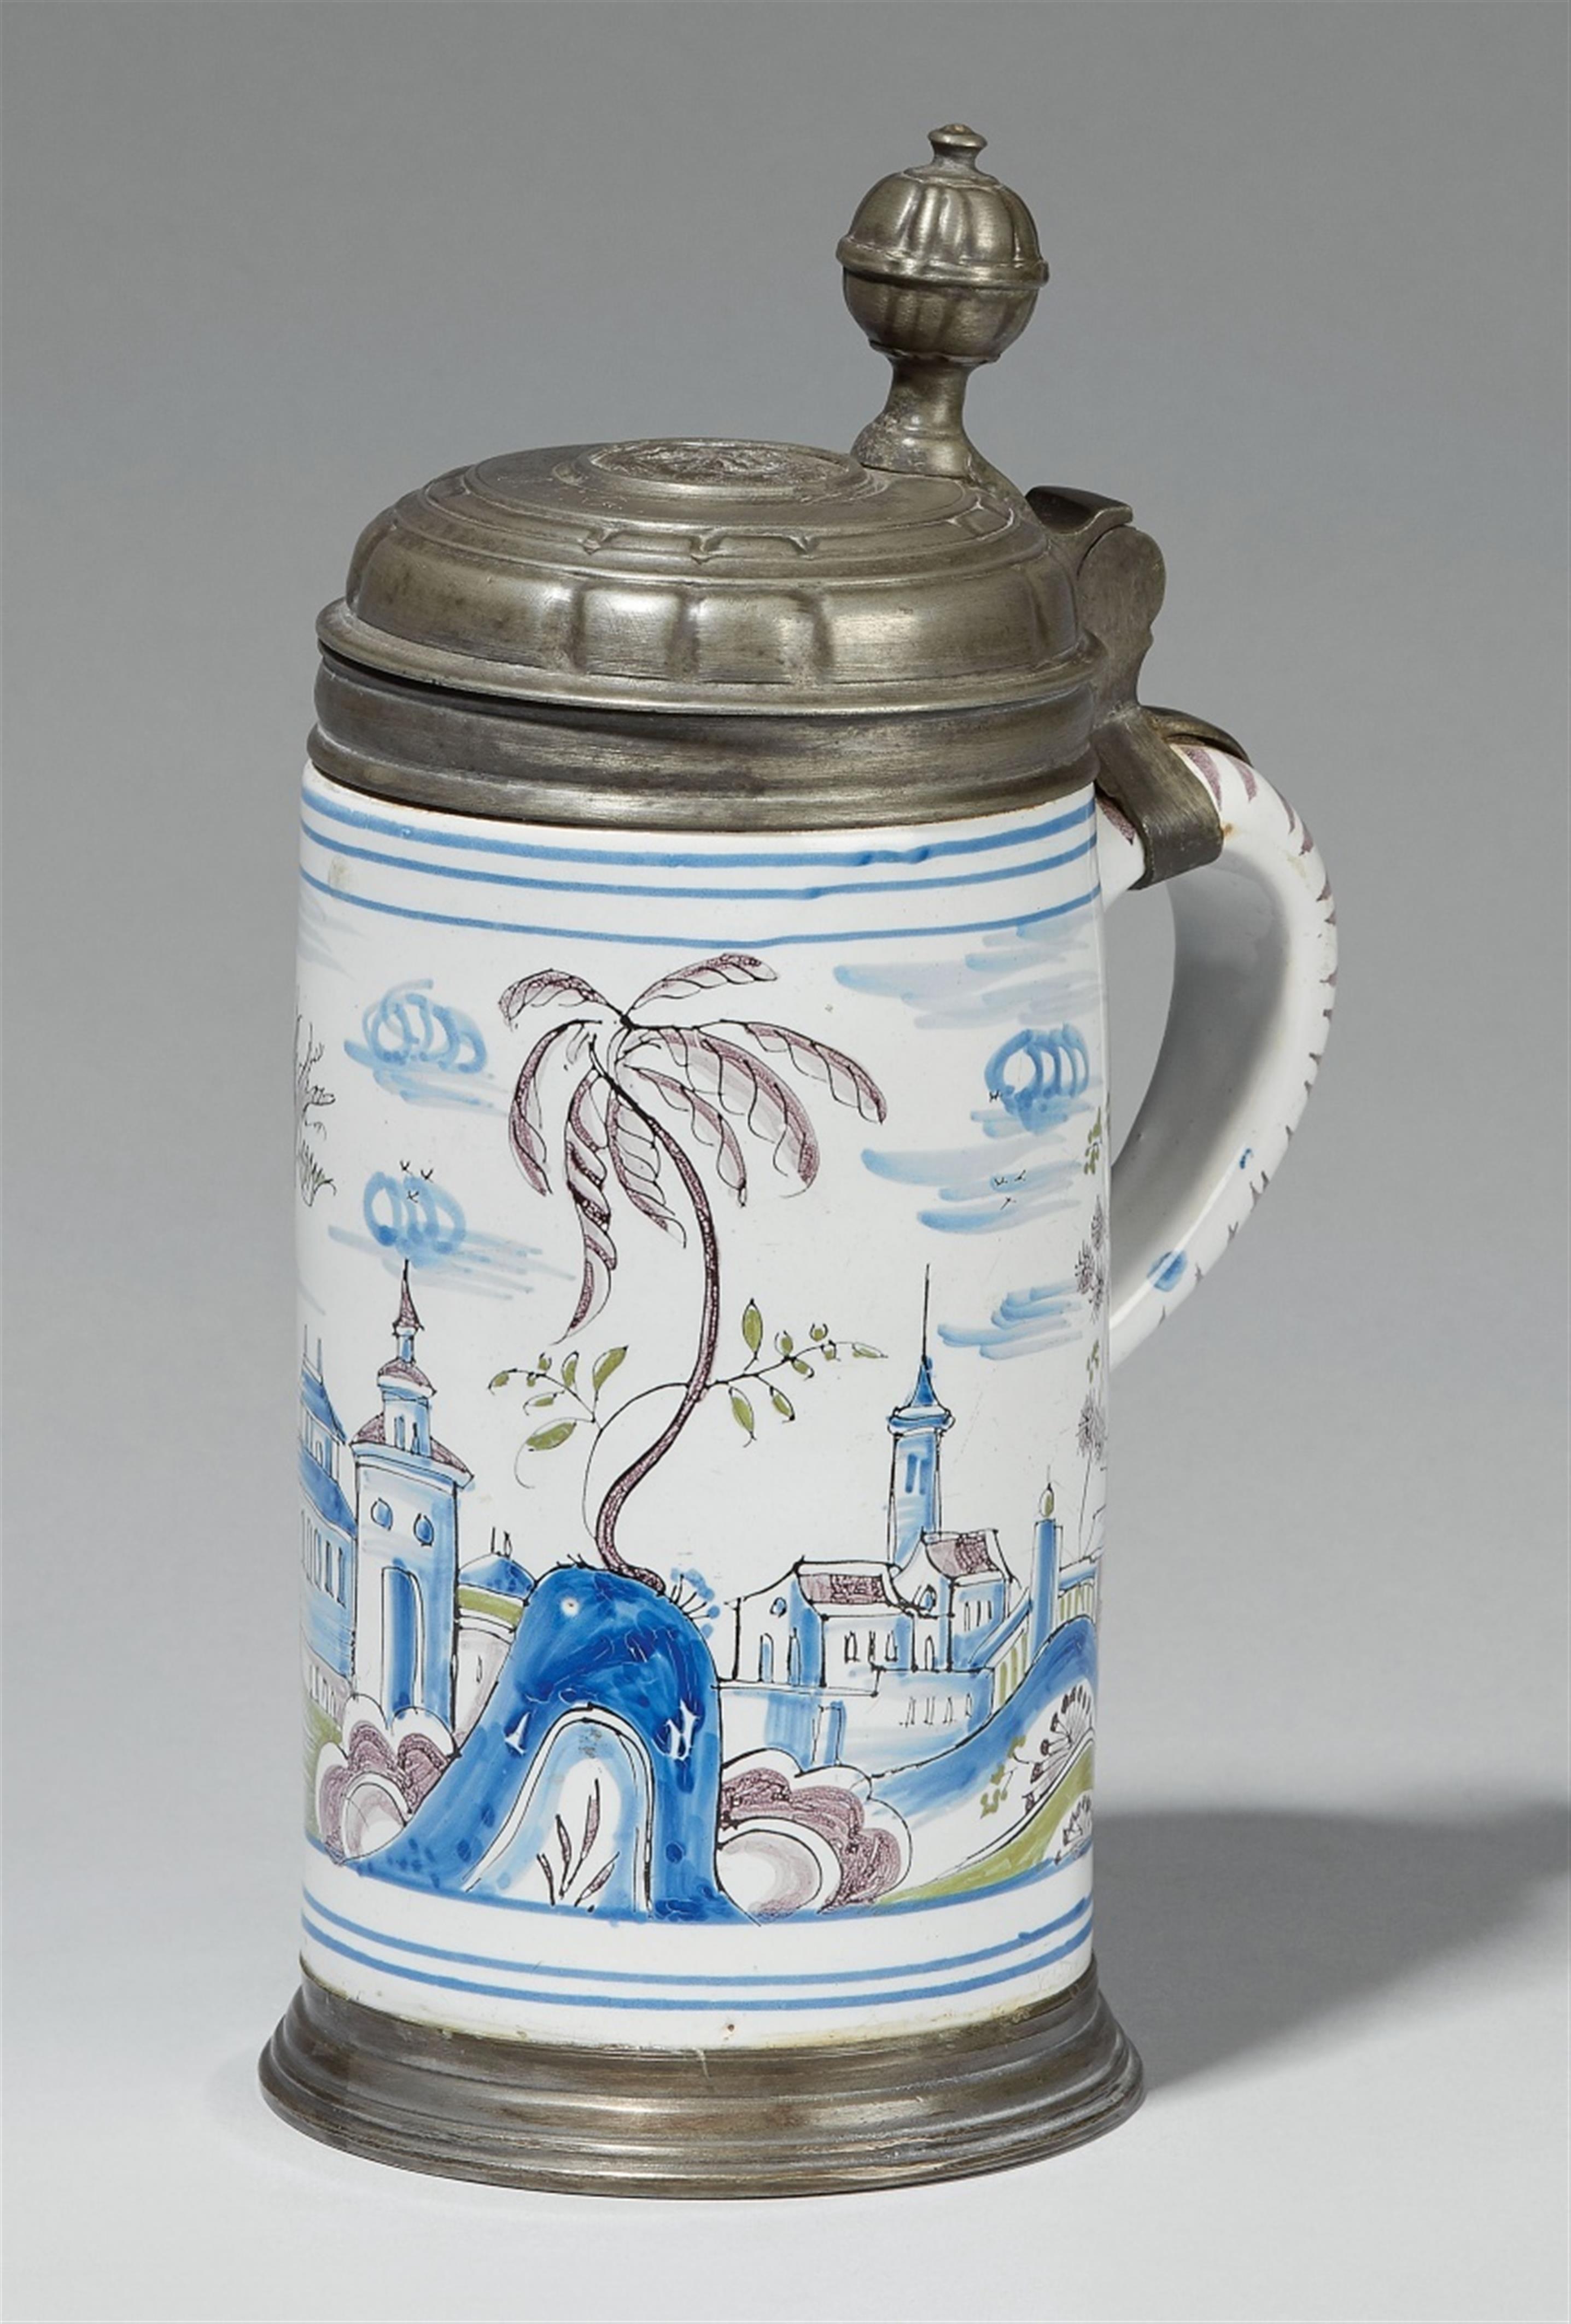 A Thuringian faience "walzenkrug" pewter-mounted pitcher - image-1